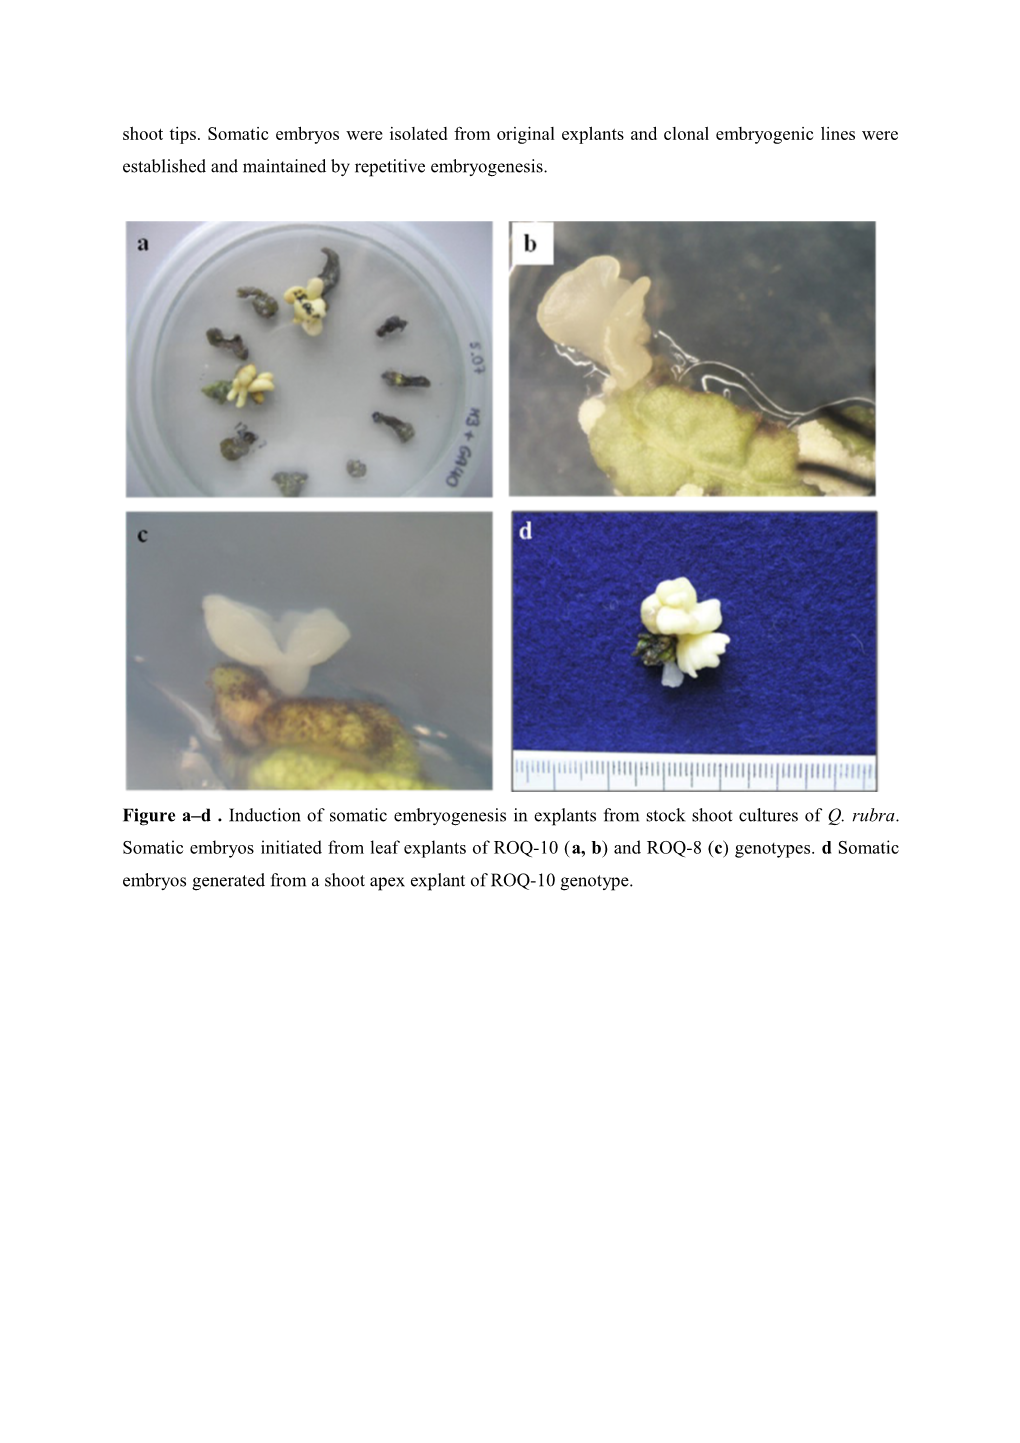 Online Resource 1: Induction of Somatic Embryogenesis in Quercus Rubra